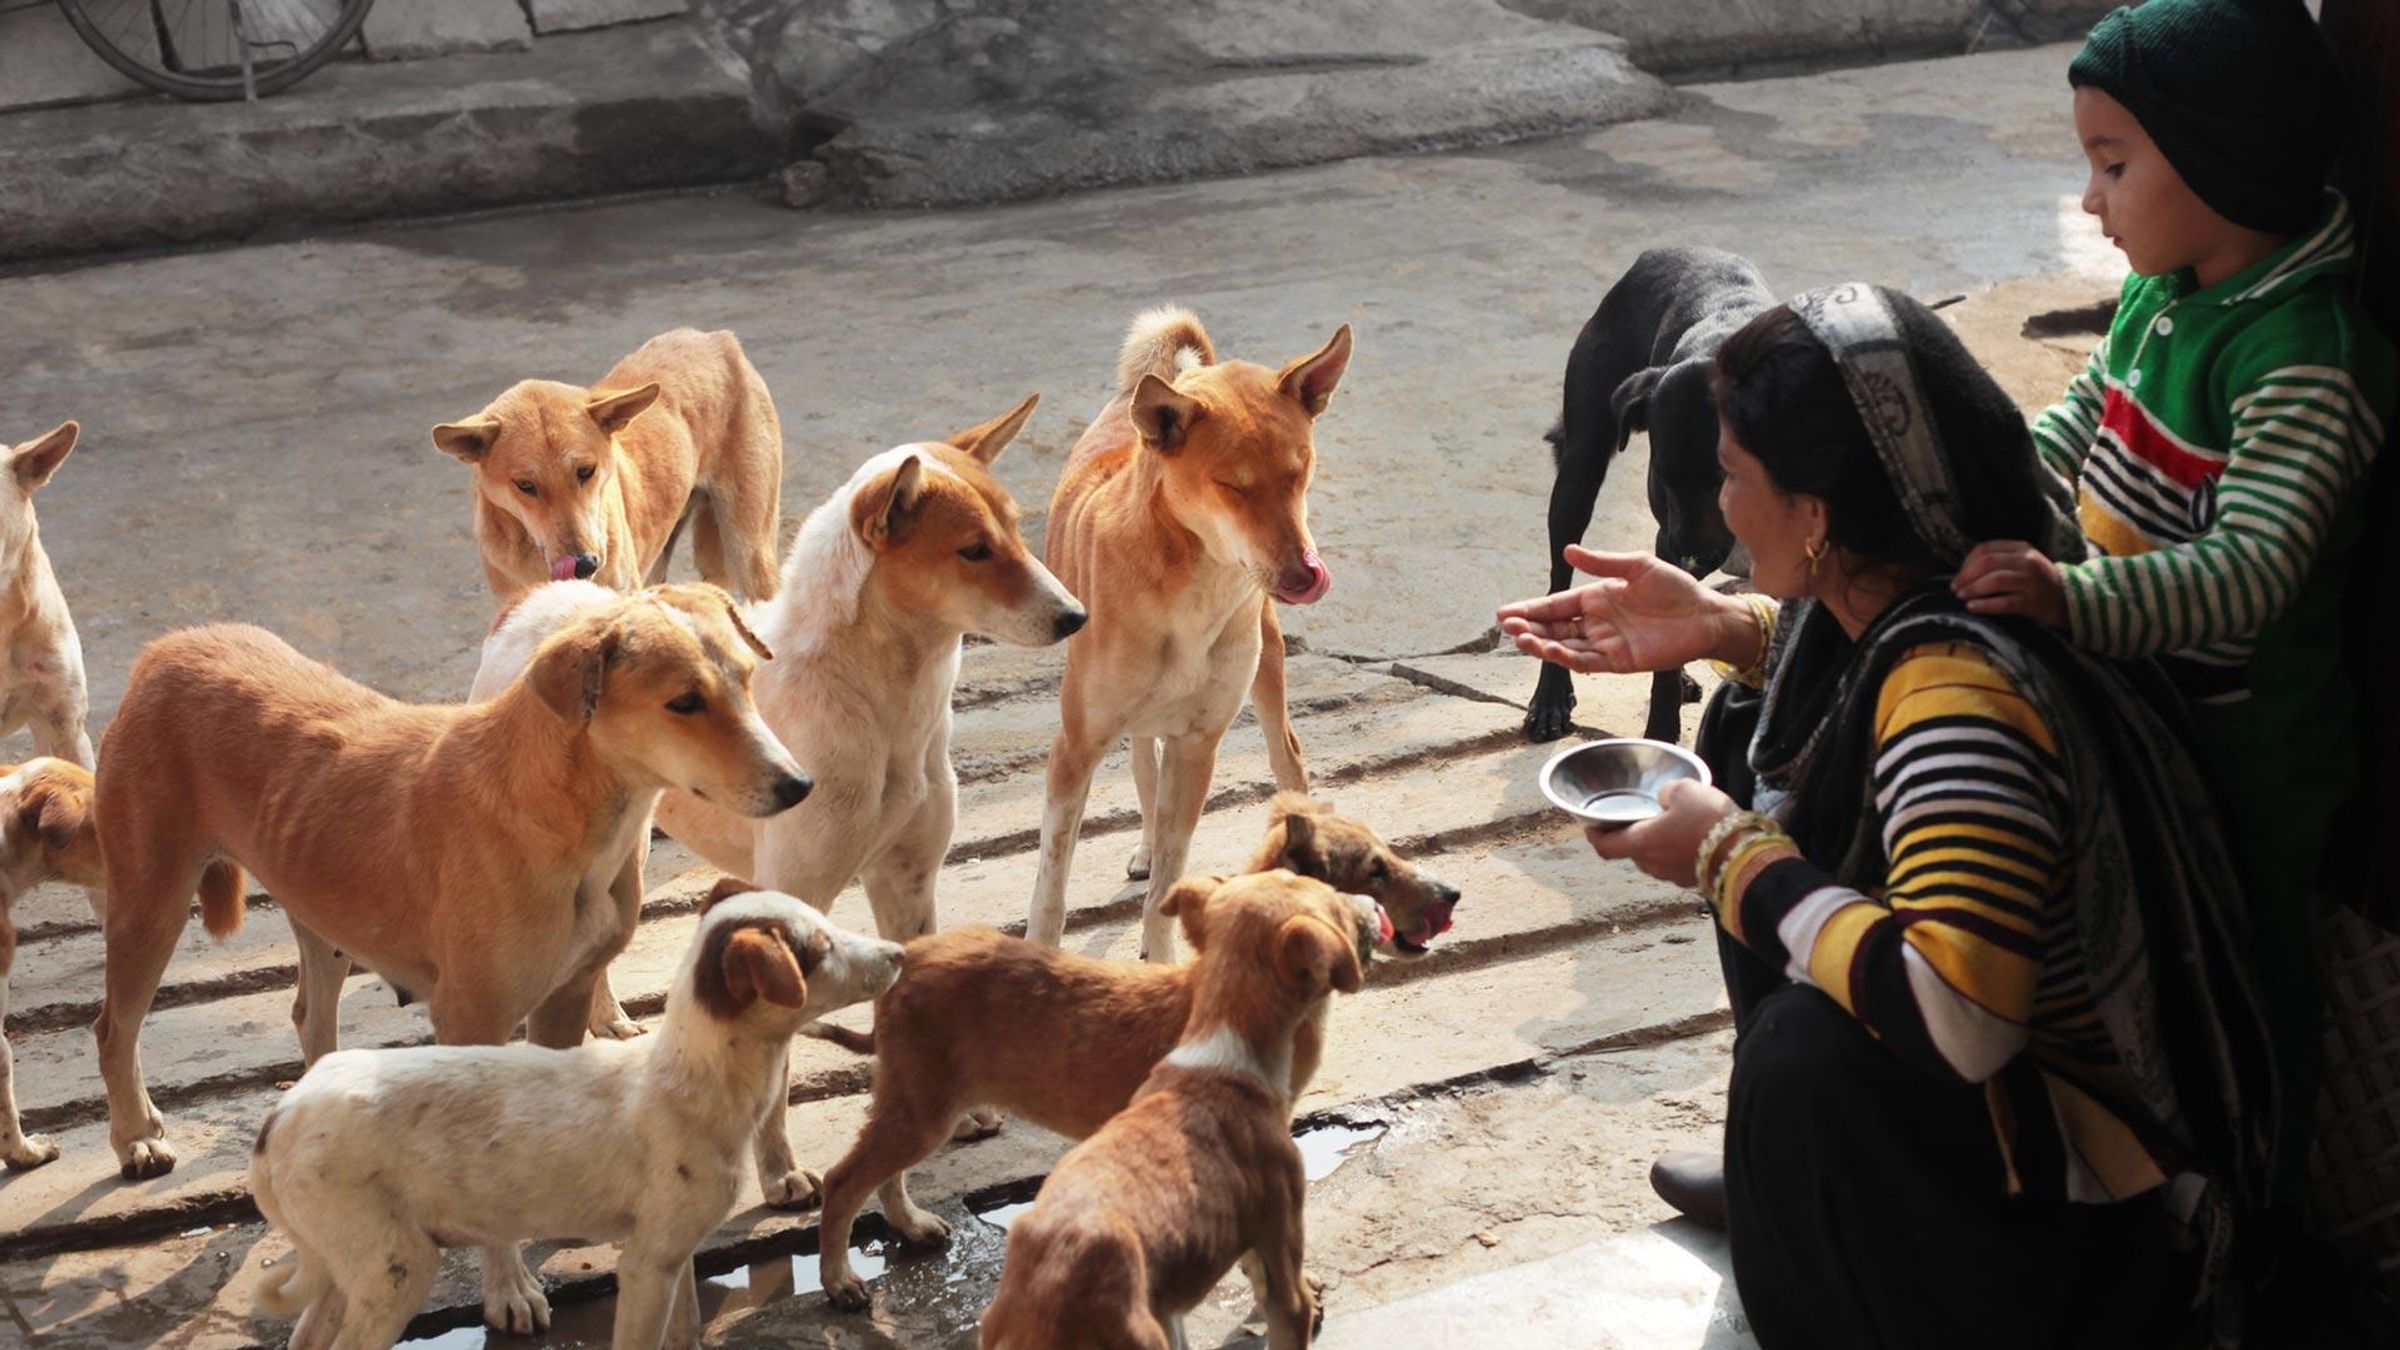 Women giving food to hungry street dogs